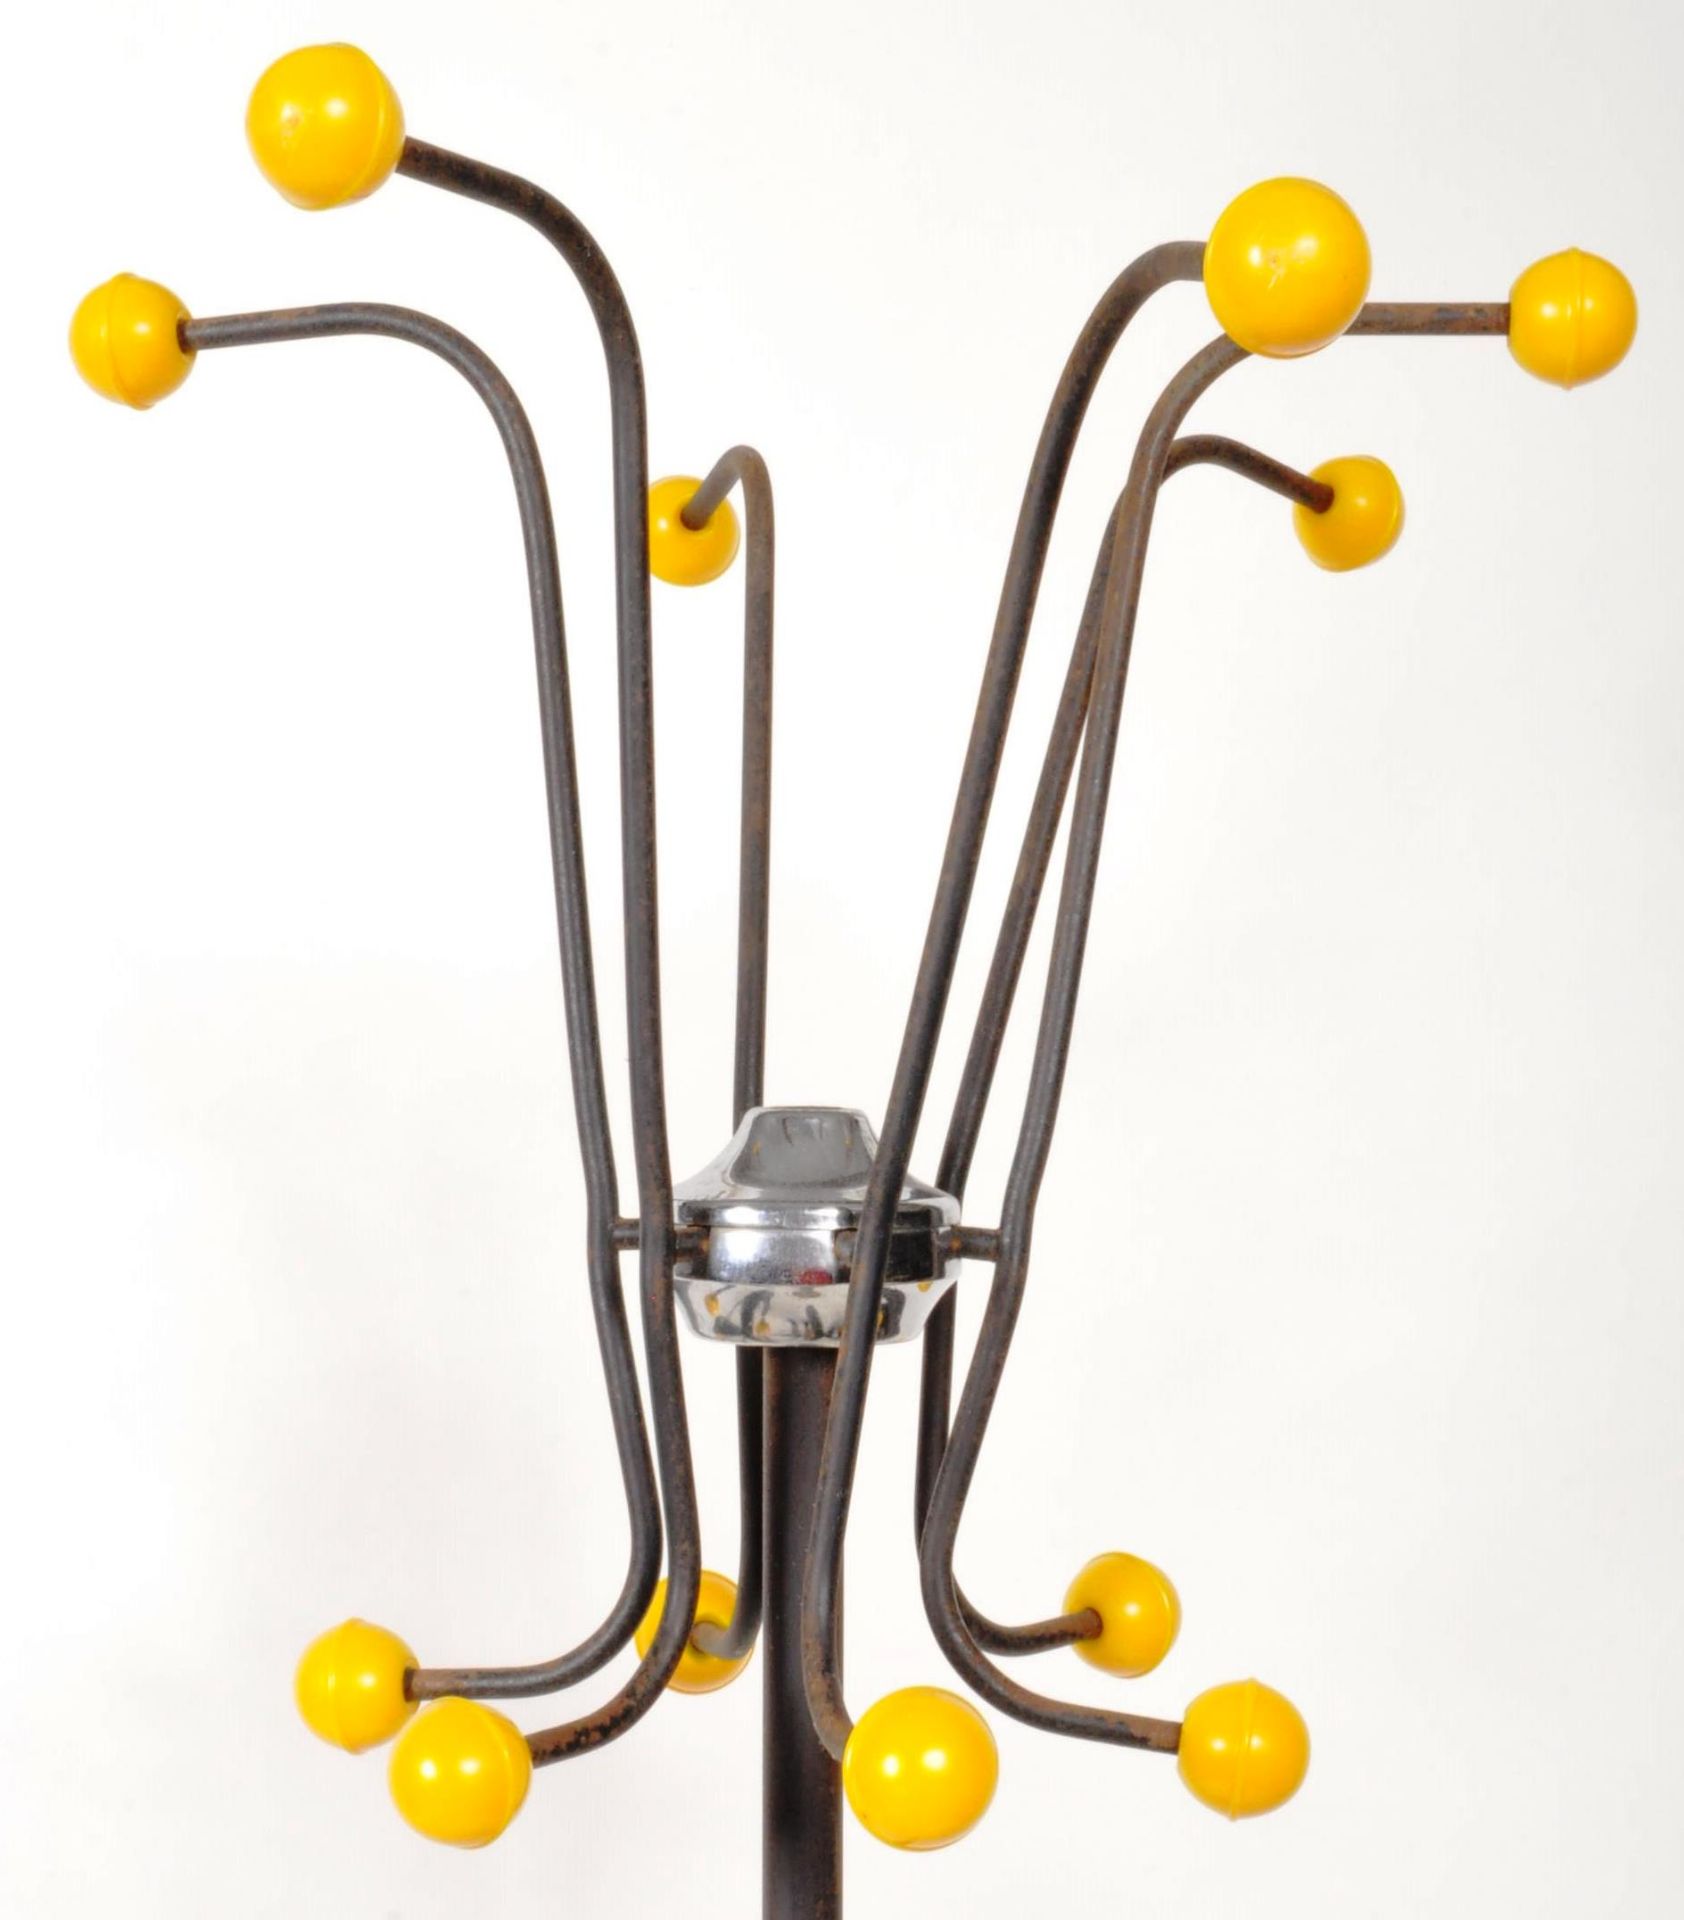 TWO MID CENTURY SPUTNIK ATOMIC SPACE AGE COAT AND HAT STANDS - Image 5 of 5